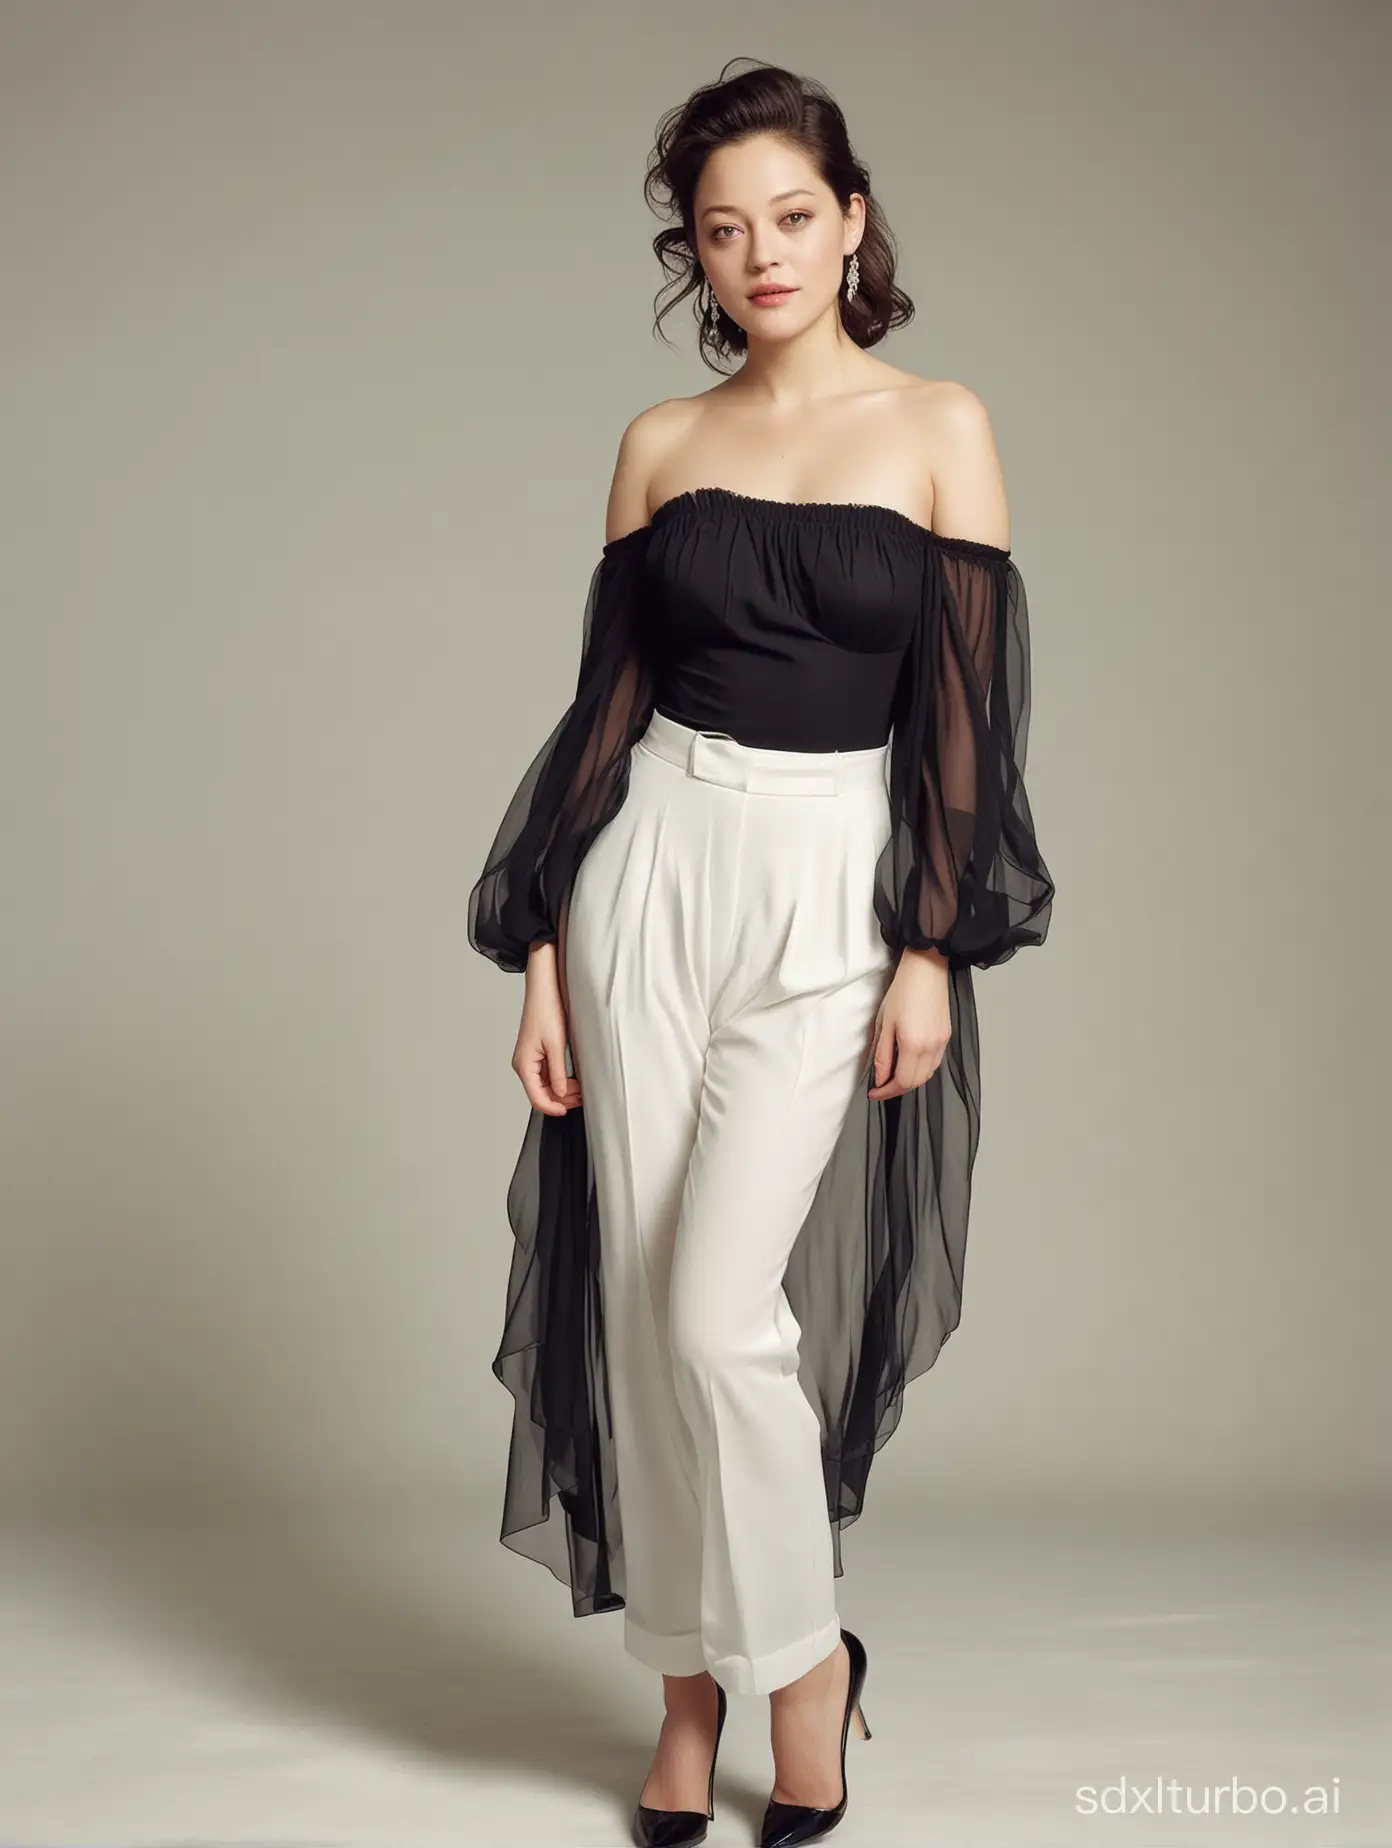 1 chinese woman，like  Marion Cotillard, huge breast，sexy， happy , （(black off-shoulder dress )), White sheer pants, long legs,Photograph by Loretta Lux